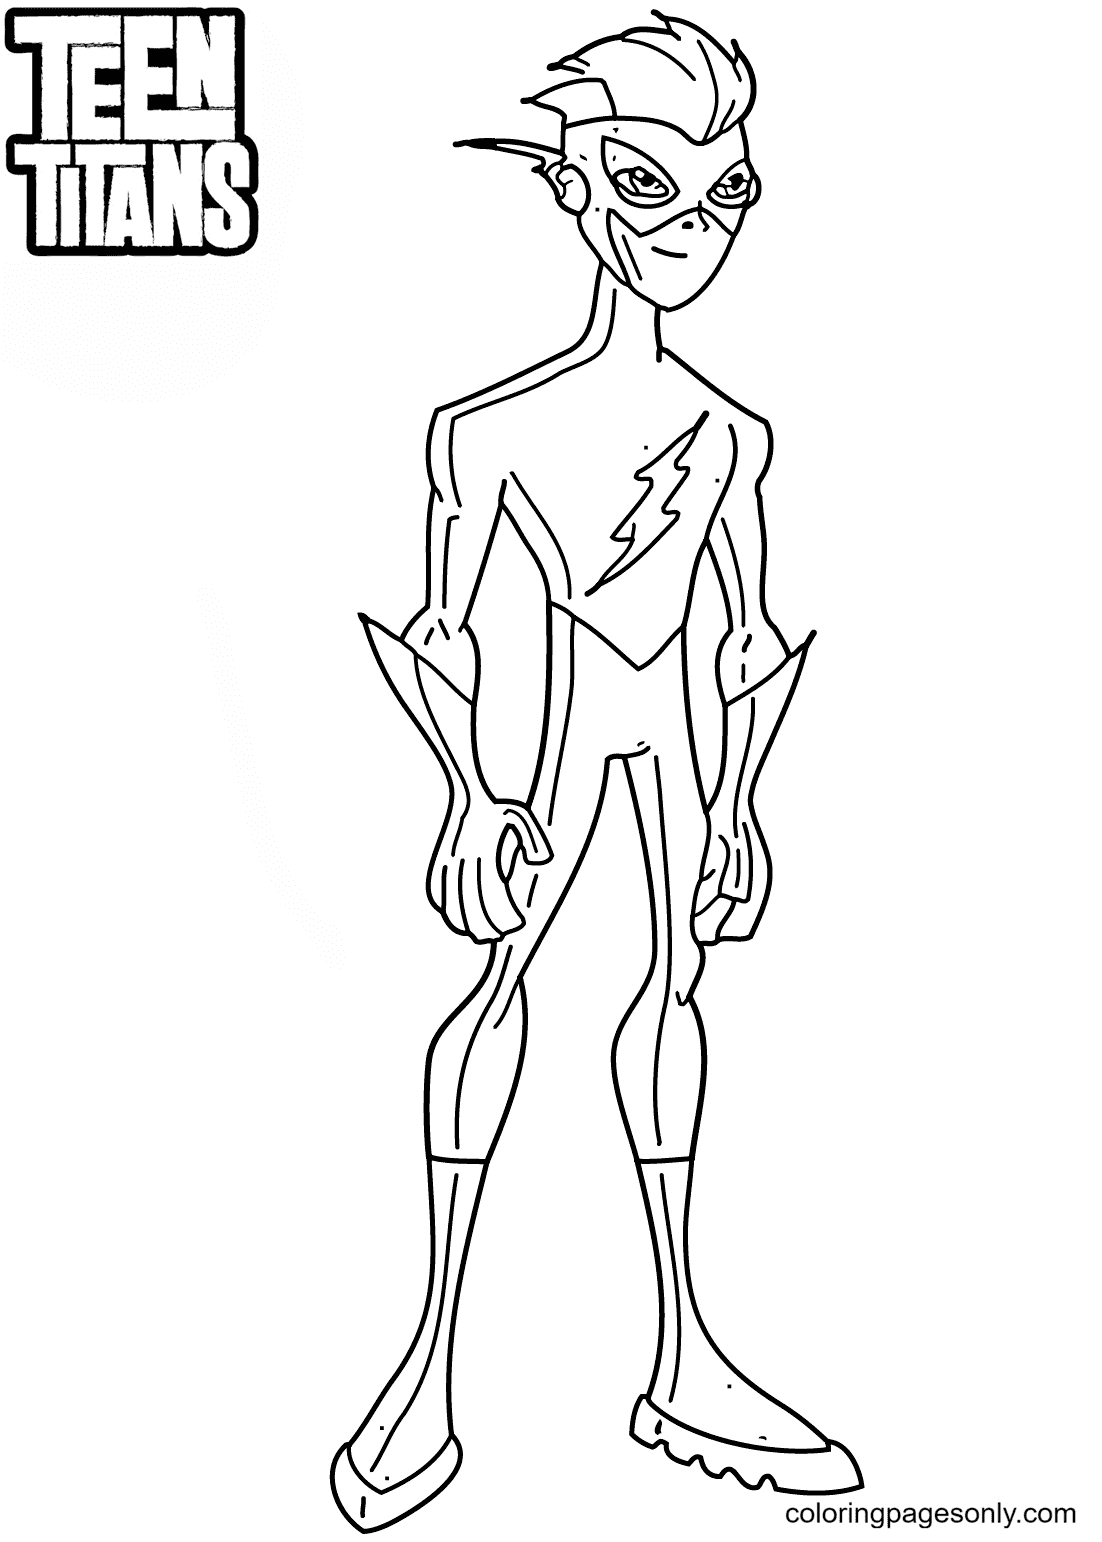 Teen Titans Kid Flash Coloring Page